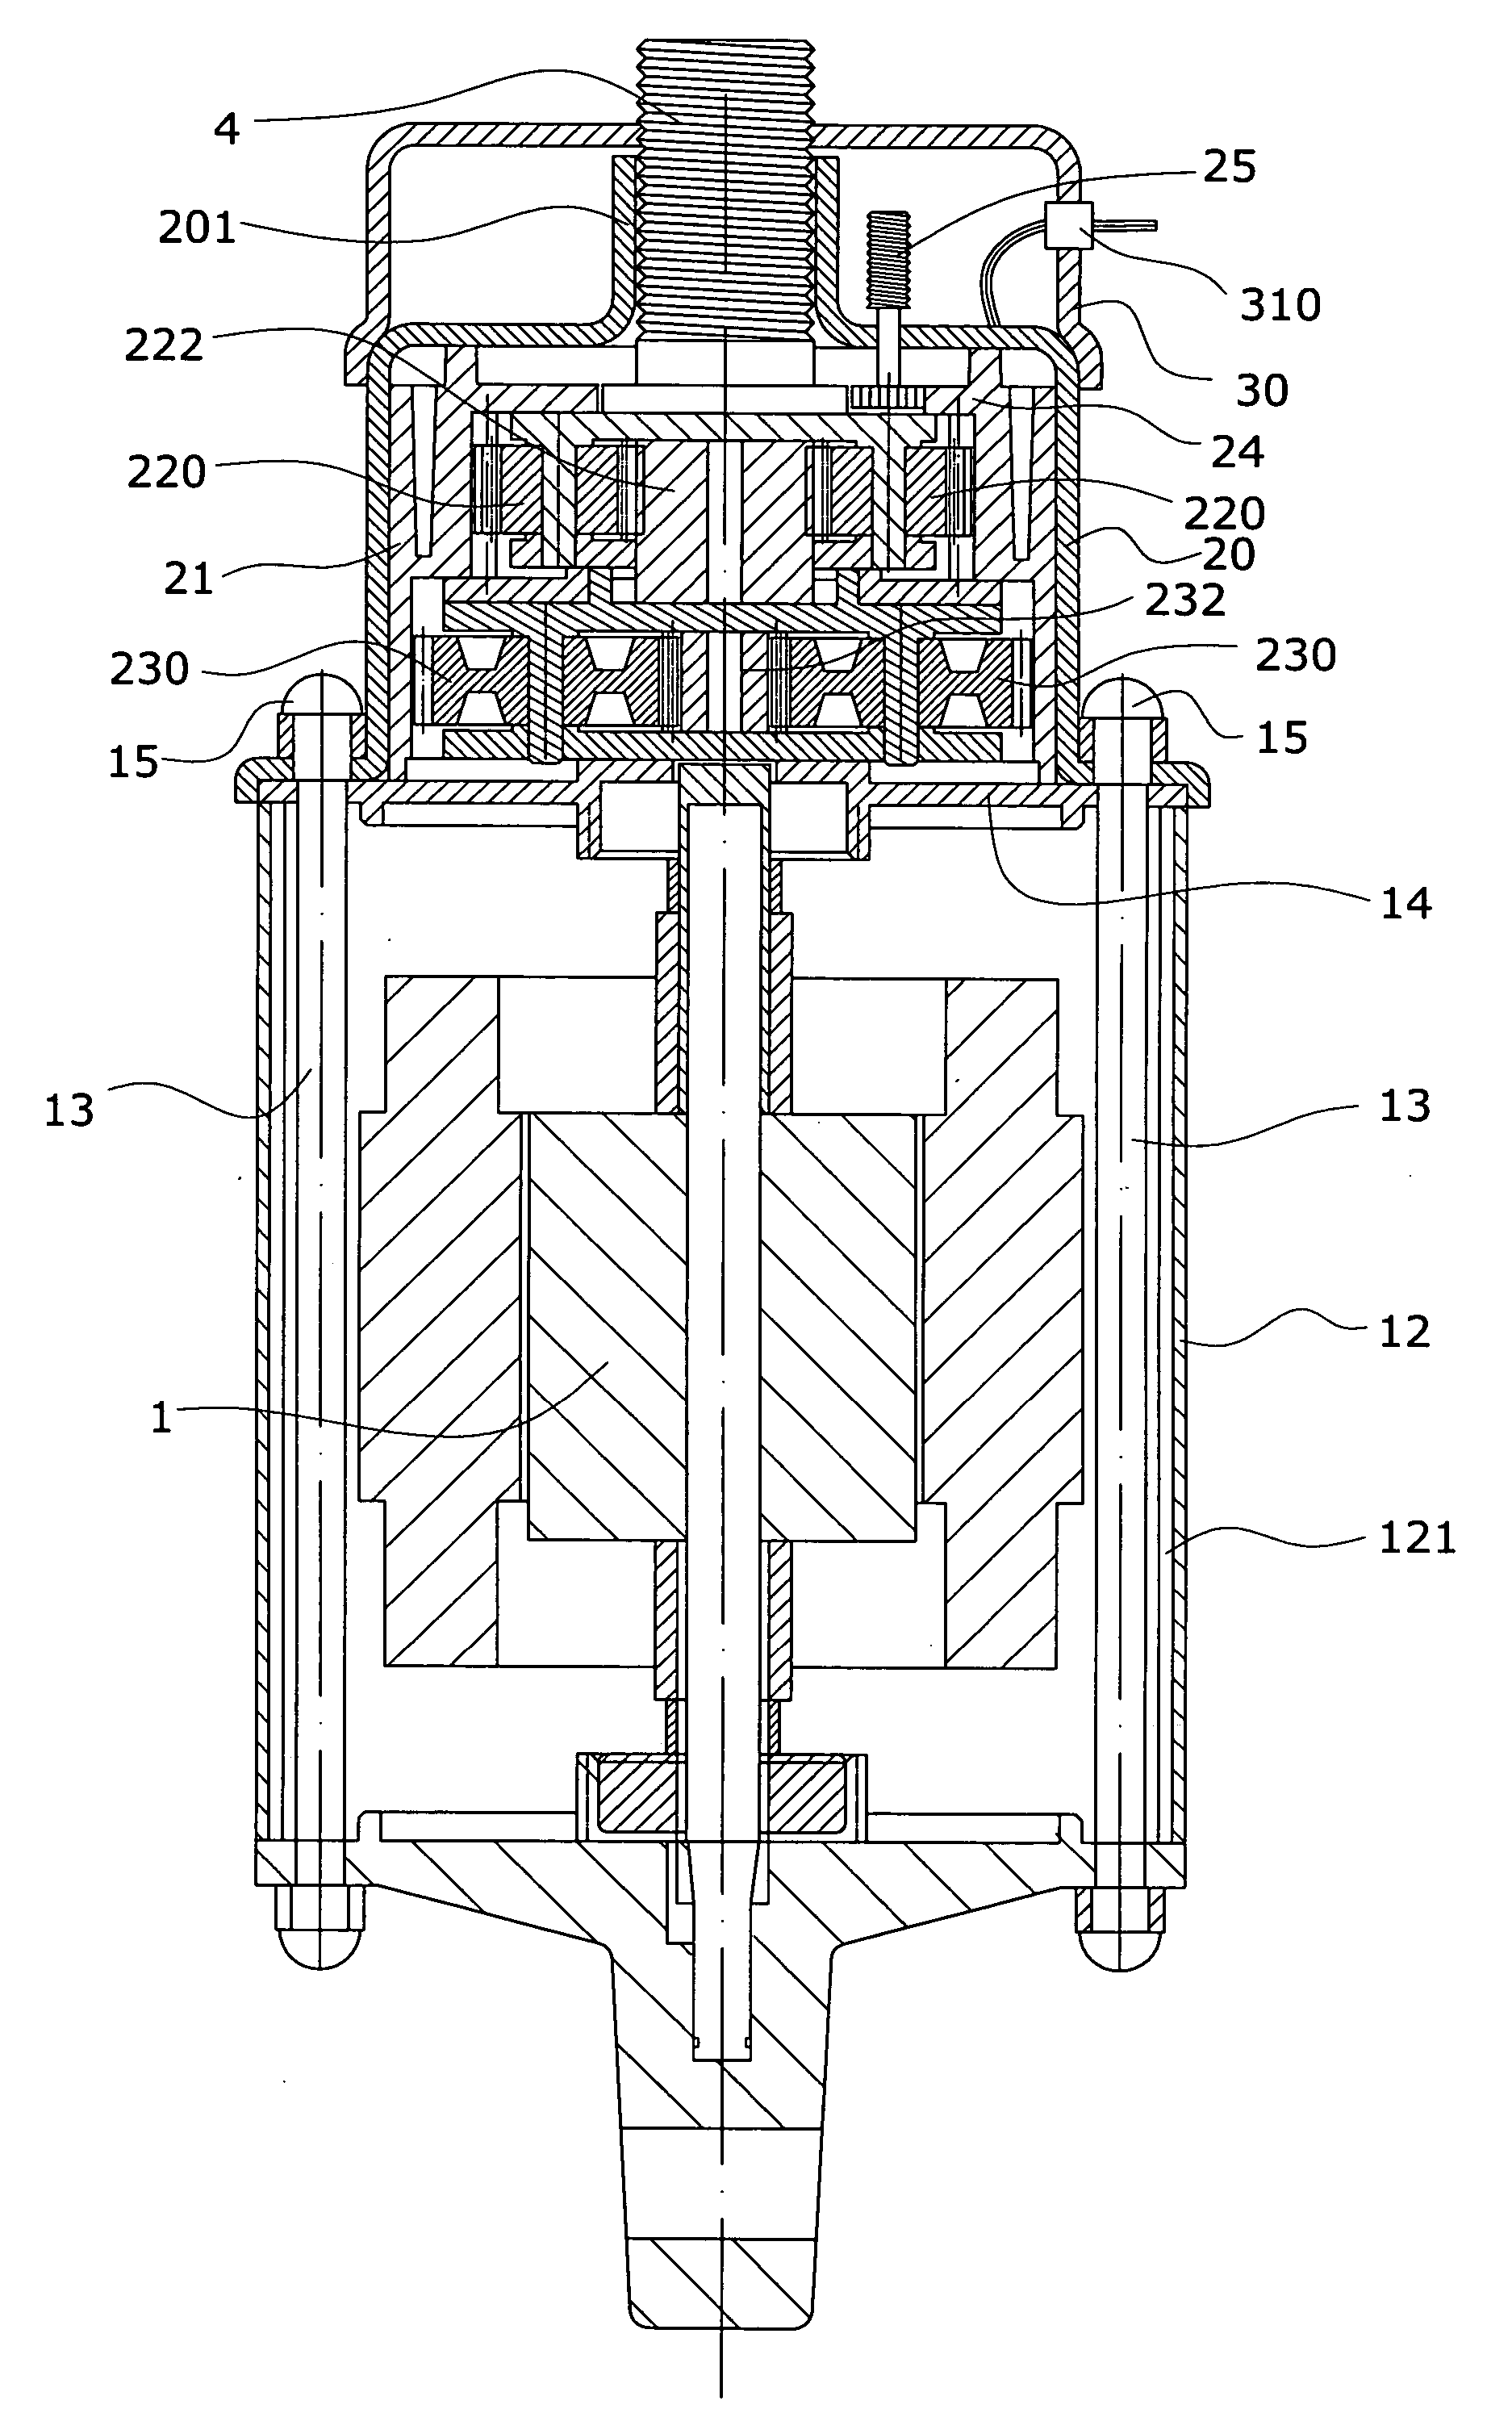 Device of an improvement on the structure of linear actuator